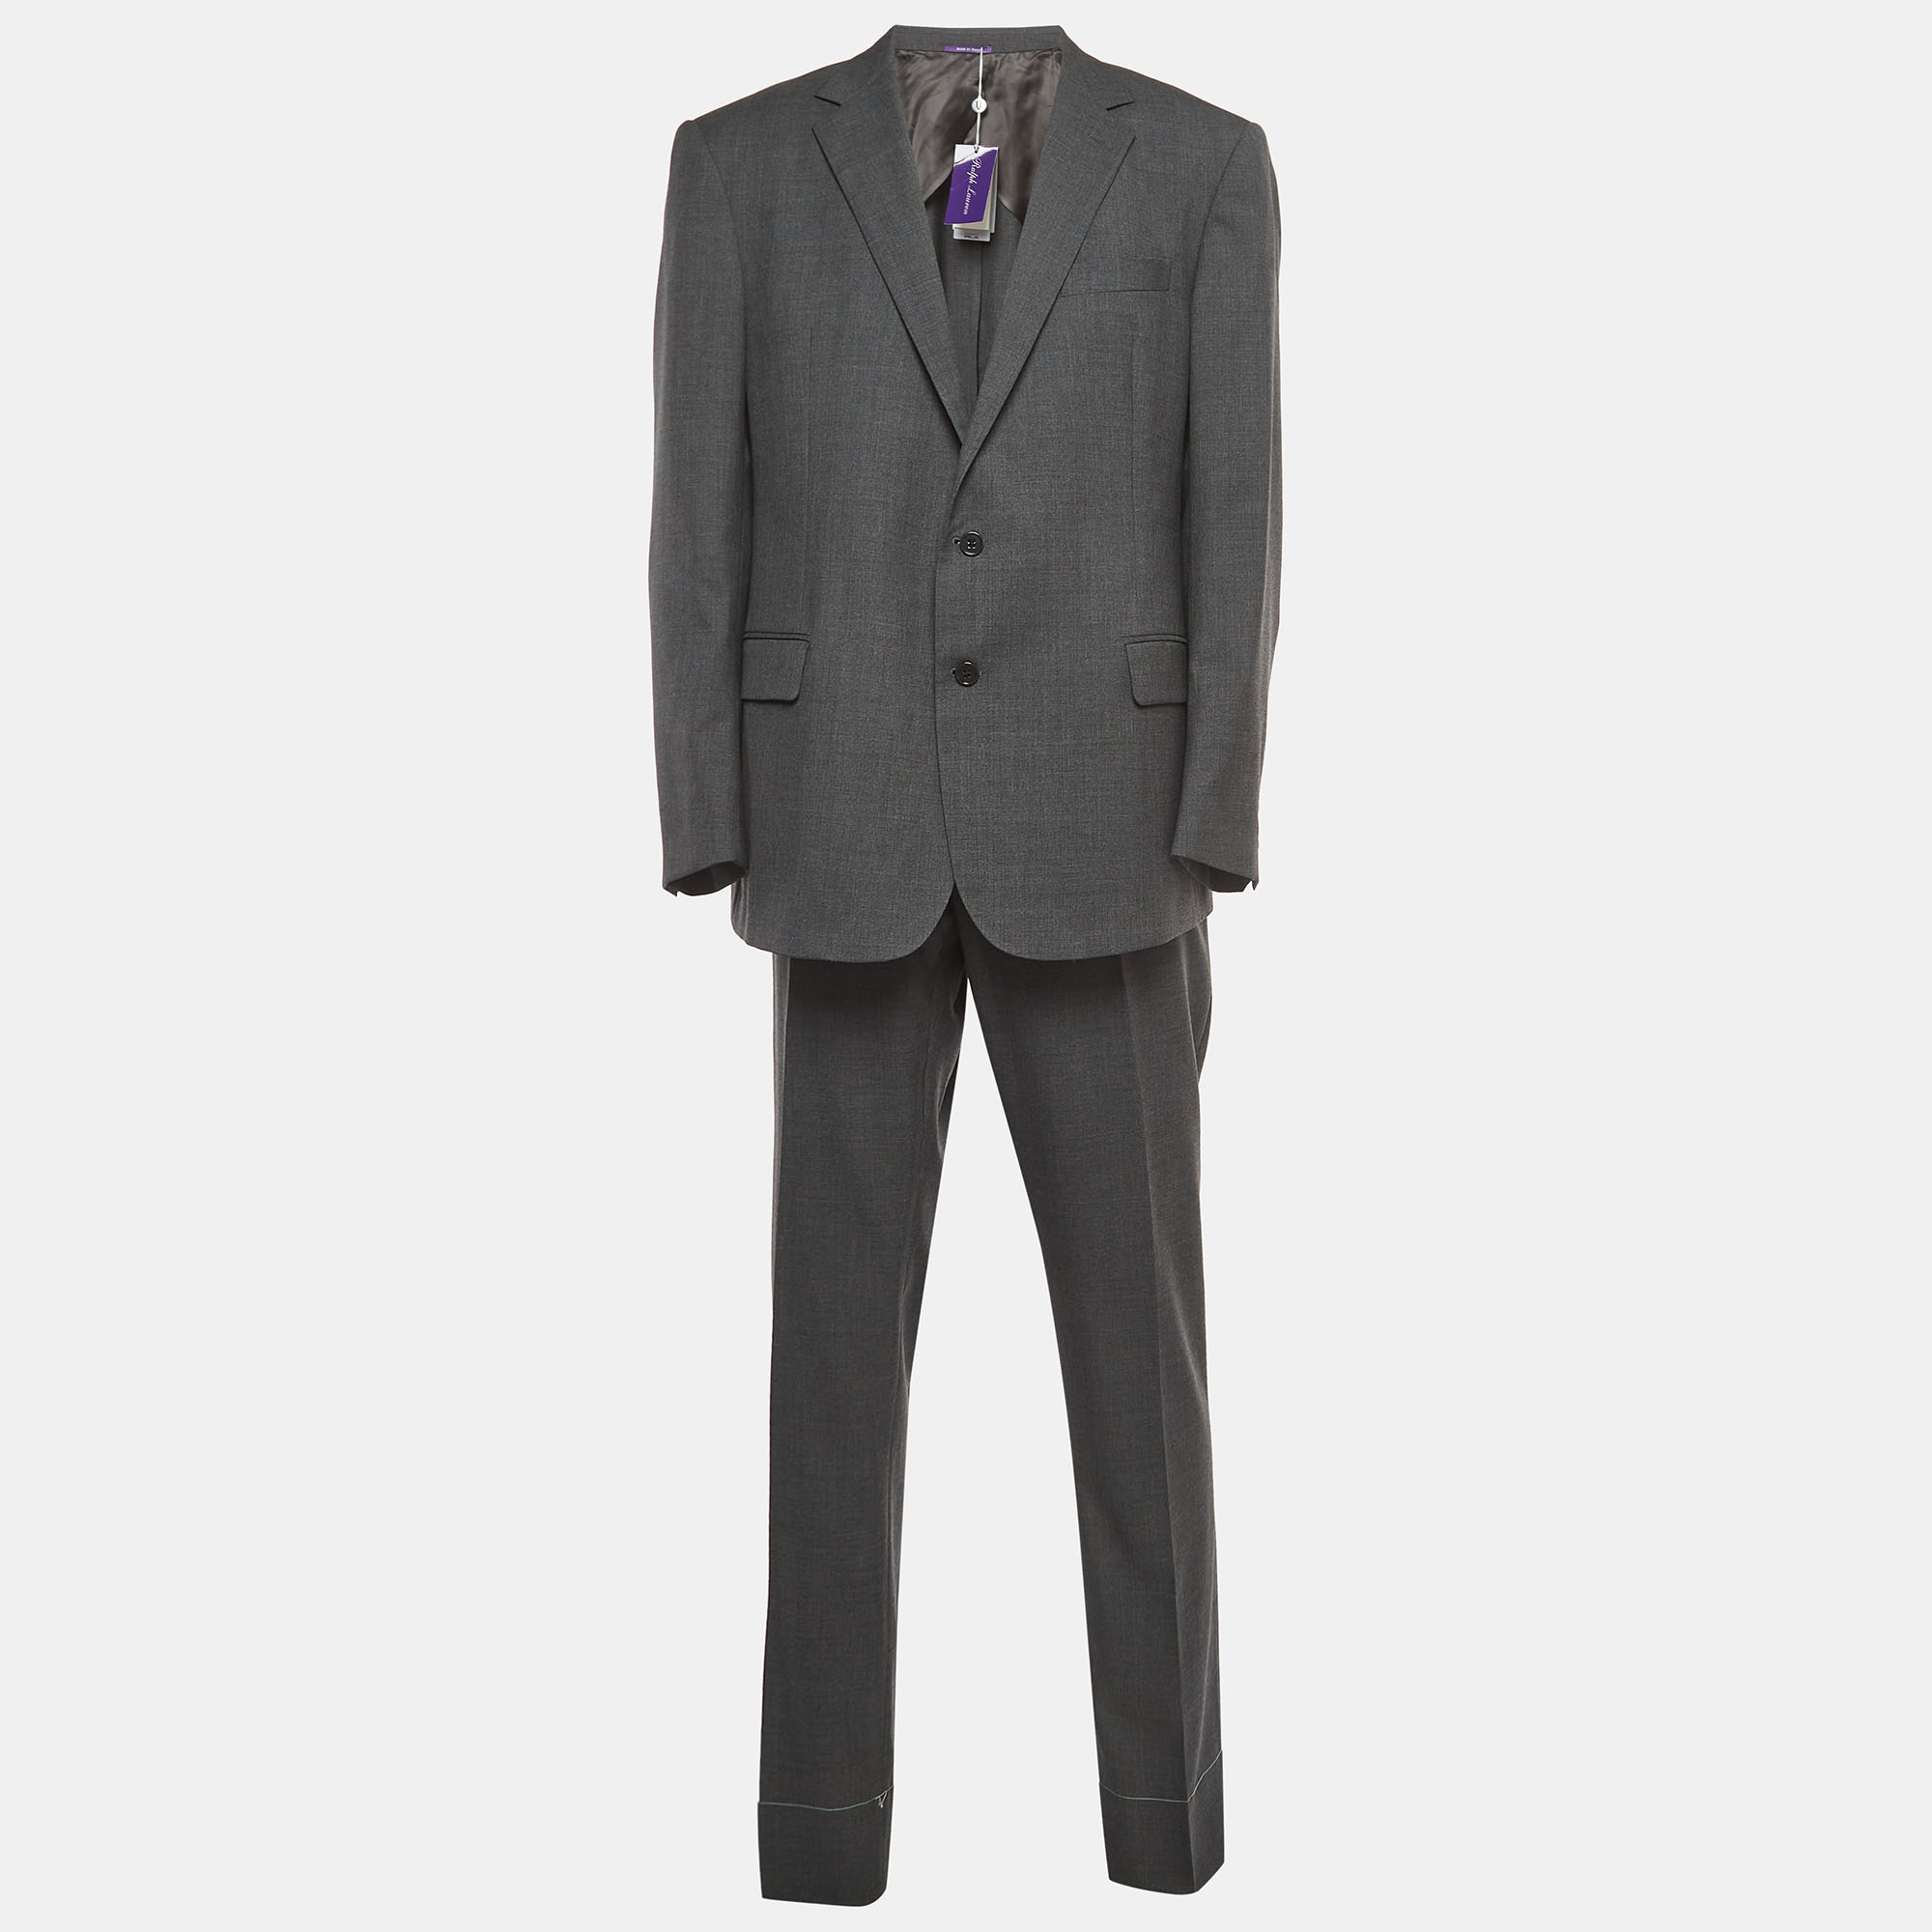 The Ralph Lauren RLX Pants Suit exudes sophistication and modern style. Crafted from high quality wool the sharkskin pattern adds a subtle texture. The blazer features a tailored fit while the pants showcase a classic silhouette. This ensemble effortlessly combines elegance with a contemporary edge.